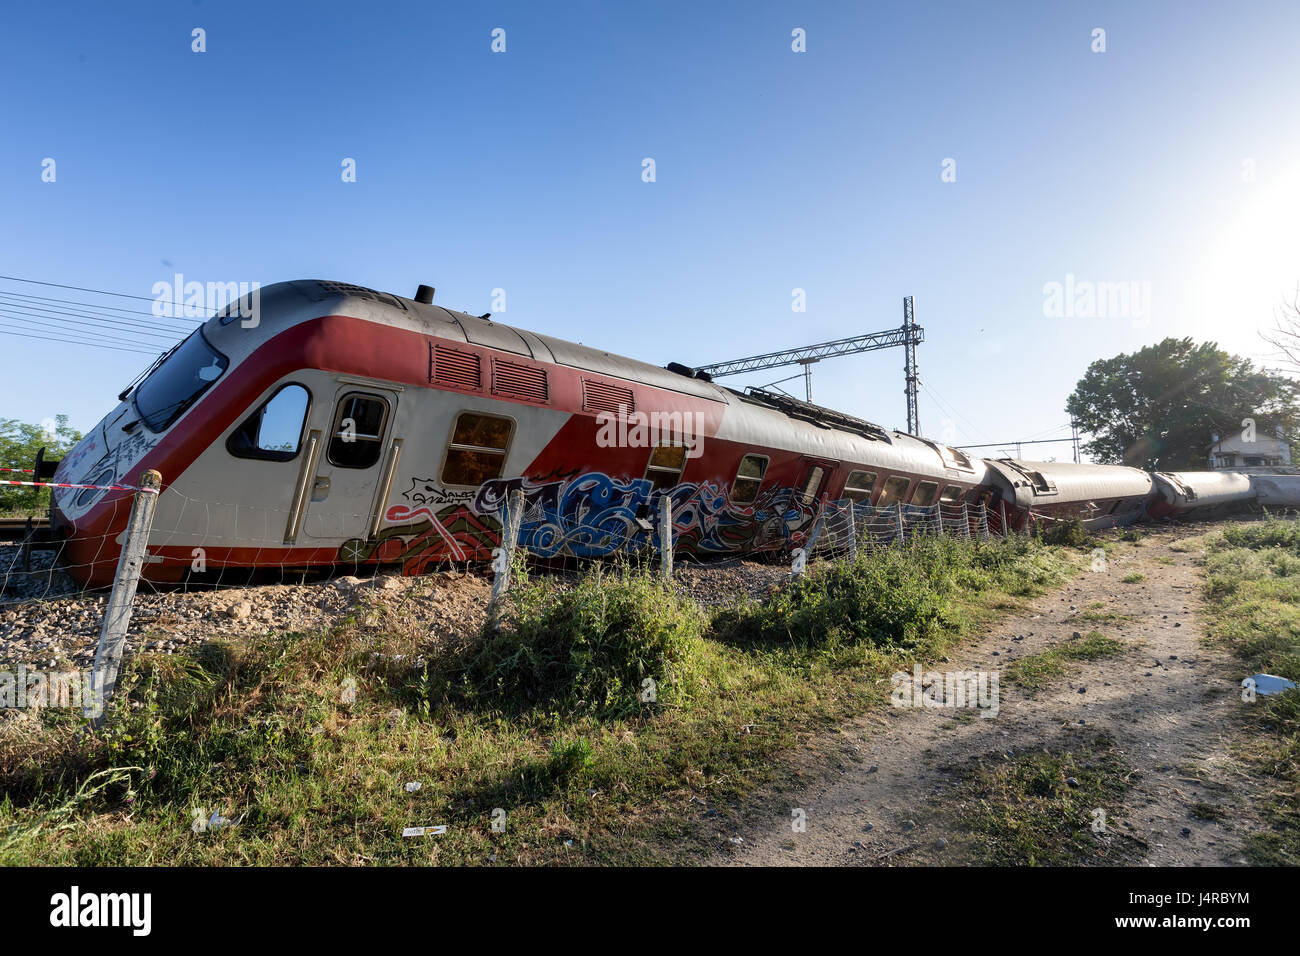 Thessaloniki, Greece – May 14, 2017: Train accident at Adendro, almost 40km west of Thessaloniki, with two confirmed dead among the passengers. The train crashed into a house after derailing. Credit: VASILIS VERVERIDIS/Alamy Live News Stock Photo